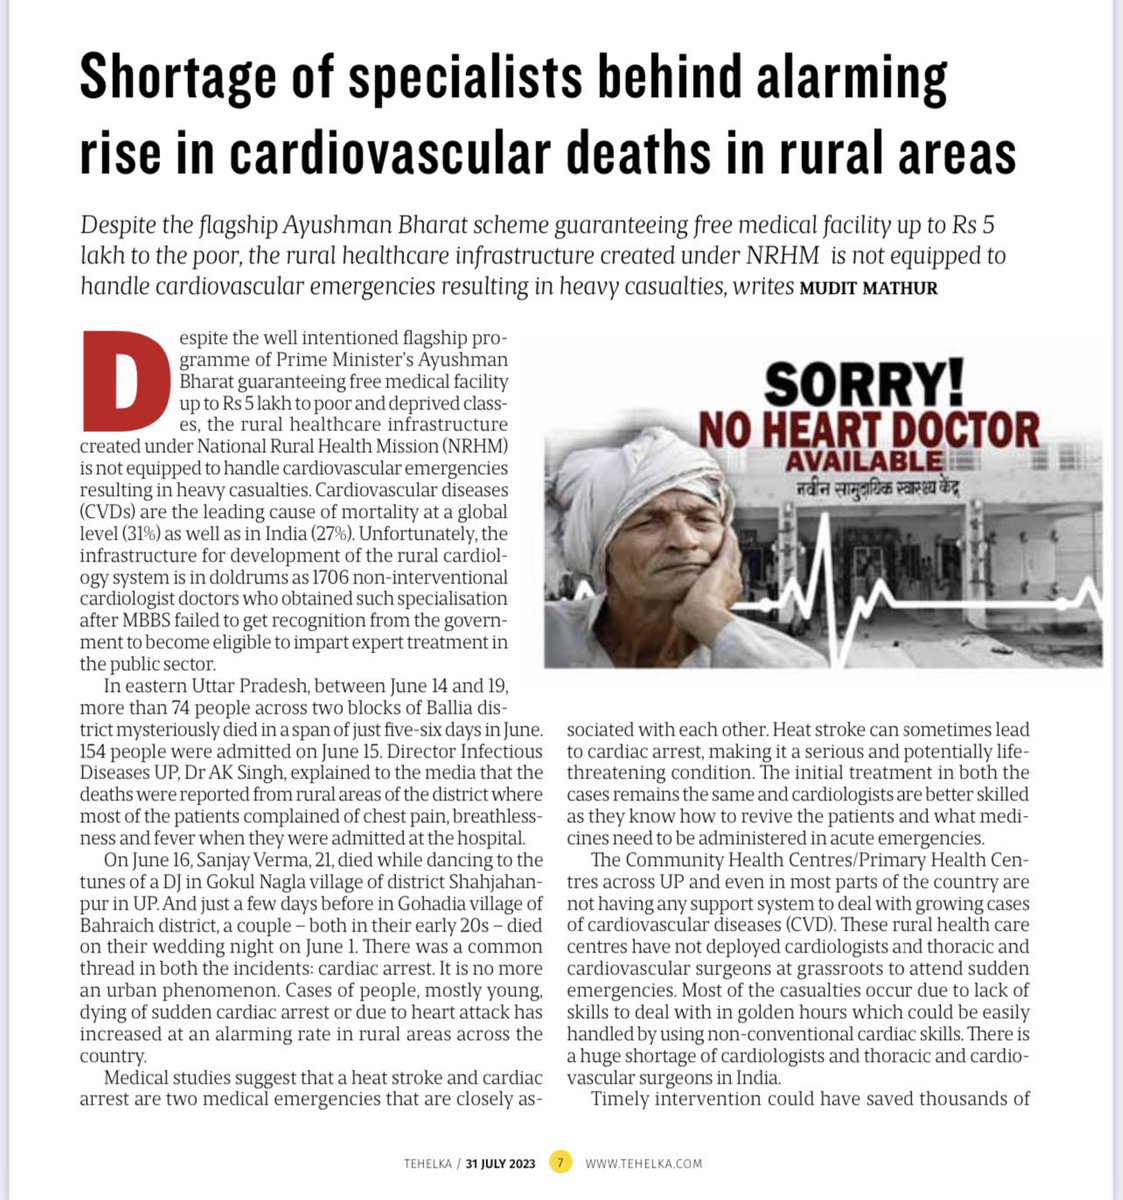 🚨Attention @CSEP_Org and @csepresearch . It's disheartening to see inaccurate information about clinical cardiology program.Rural areas need more doctors!🩺💙 tehelka.com/shortage-of-sp…